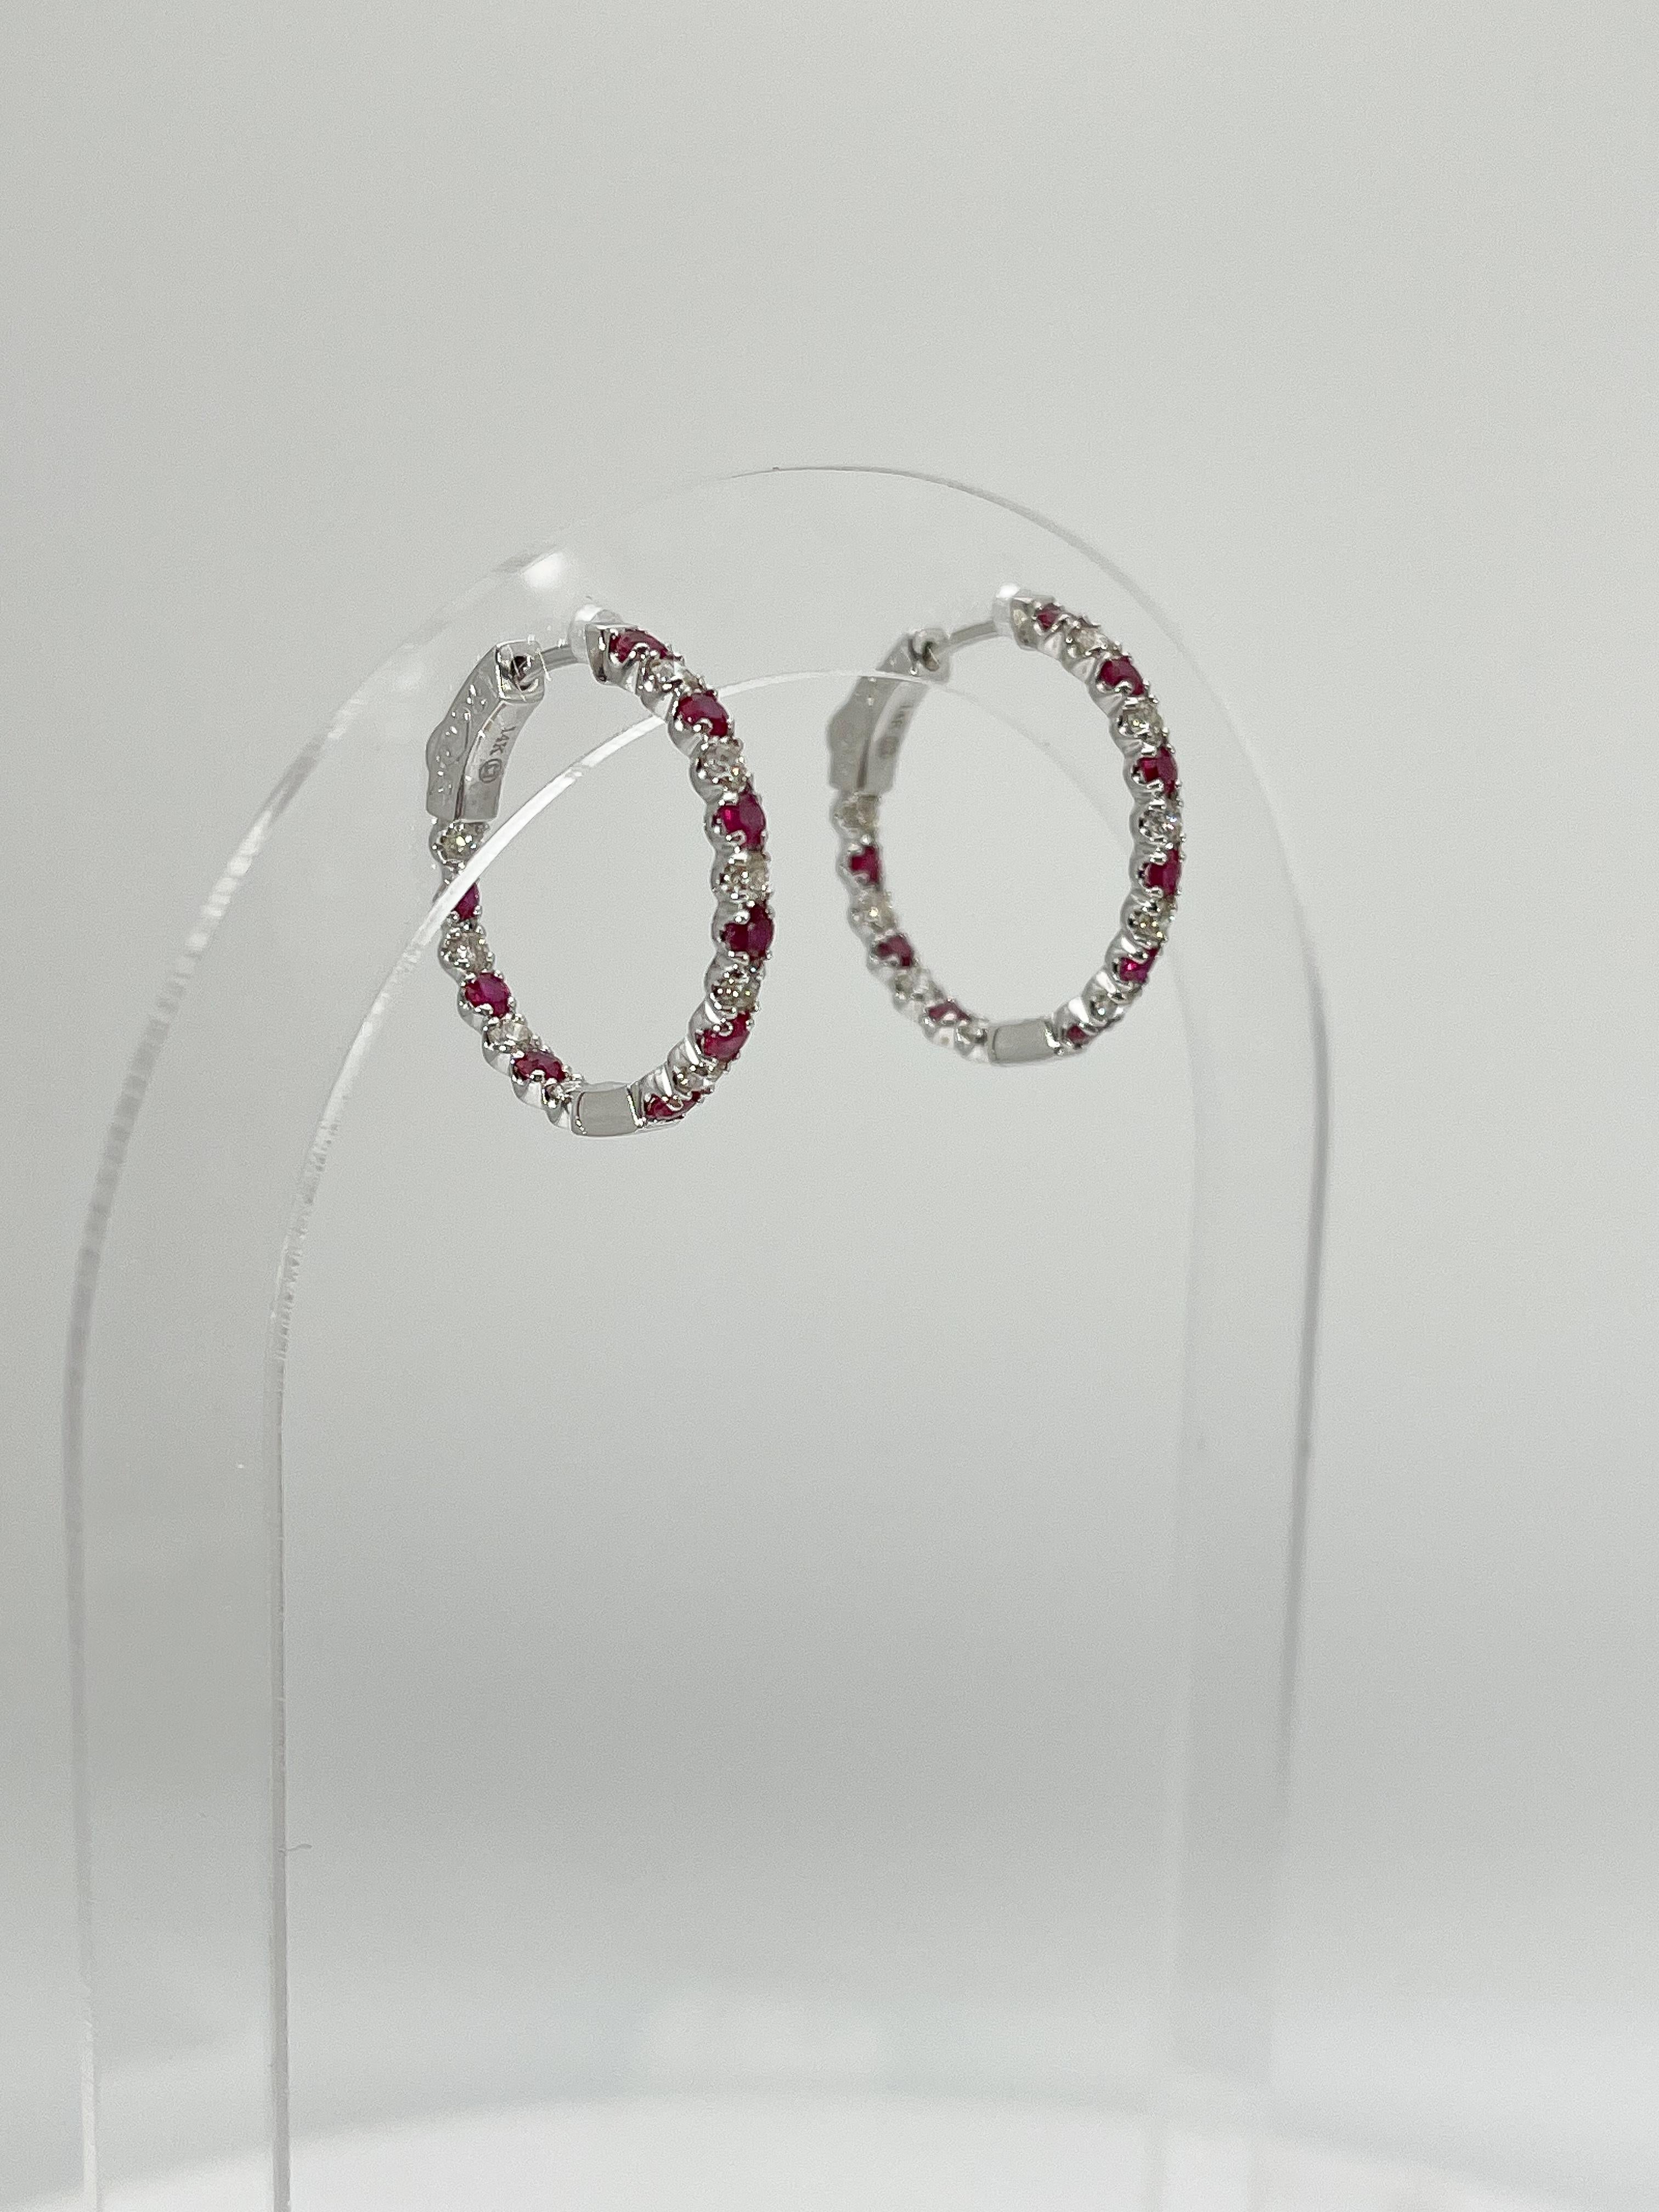 14K White Gold .78 CTW Diamond and CTW 1.15 Ruby Hoop Earrings  In New Condition For Sale In Stuart, FL